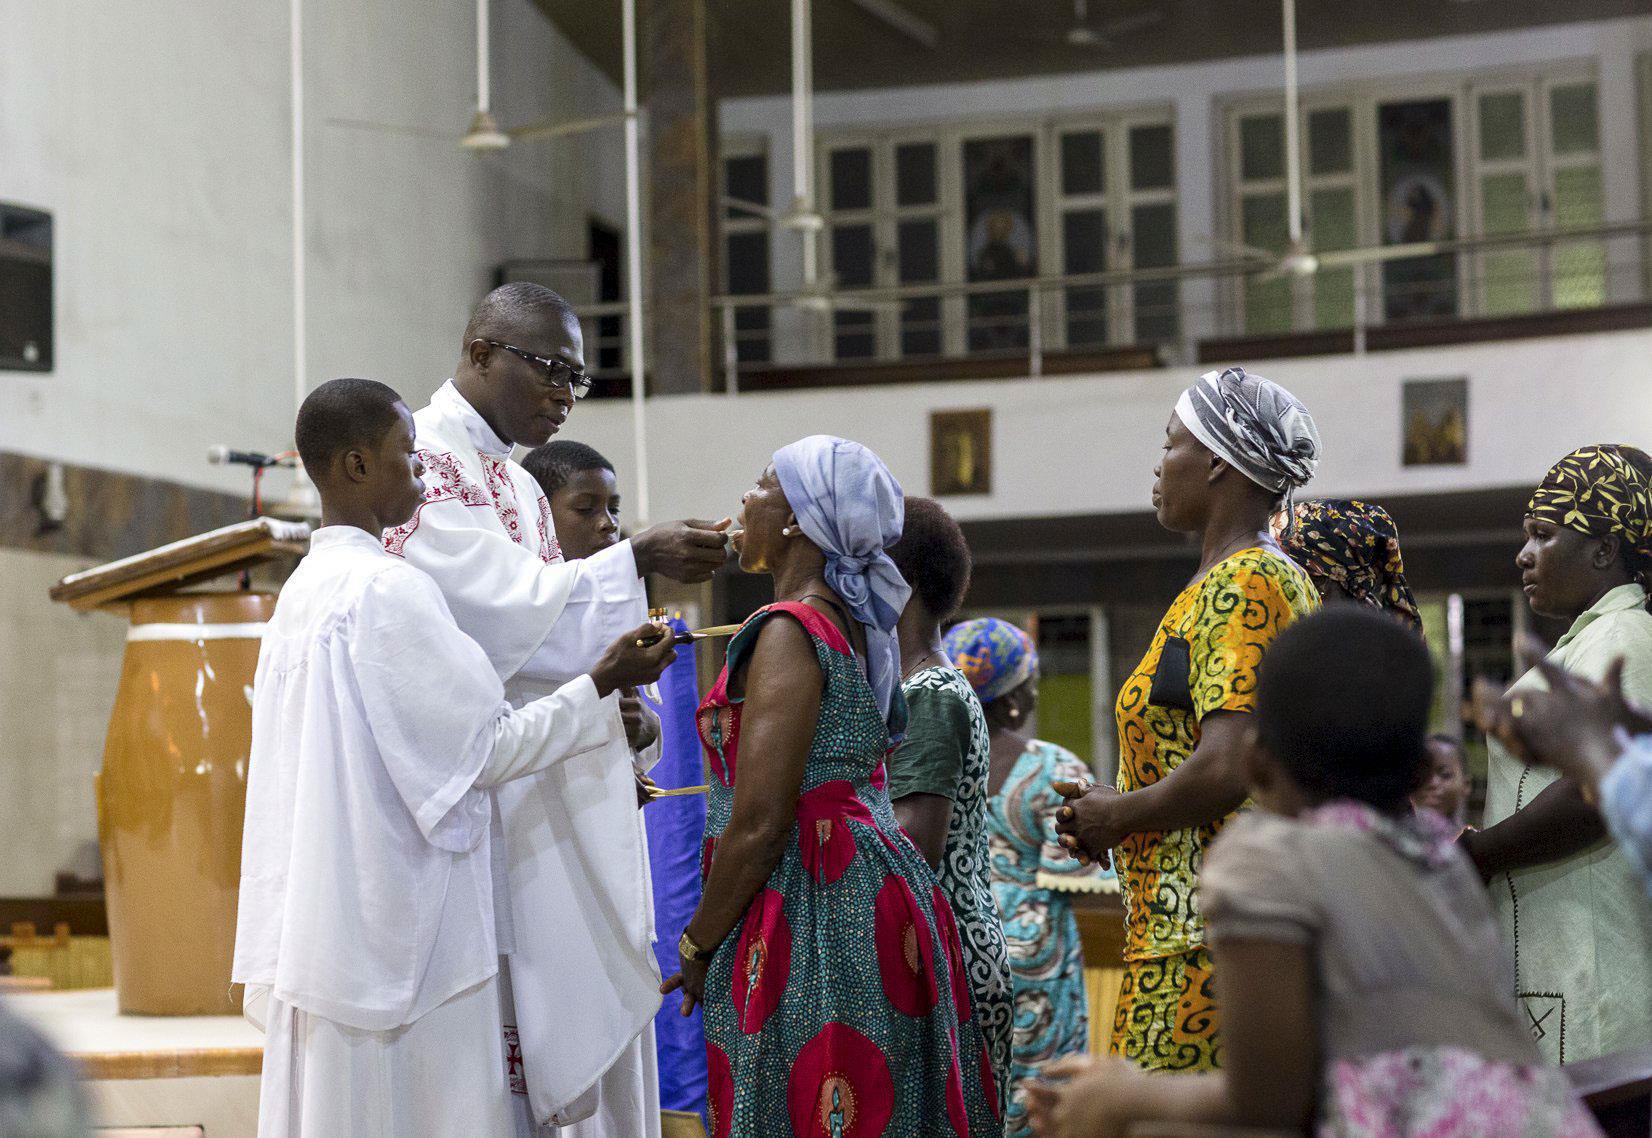 The Wider Image: Catholicism in Africa